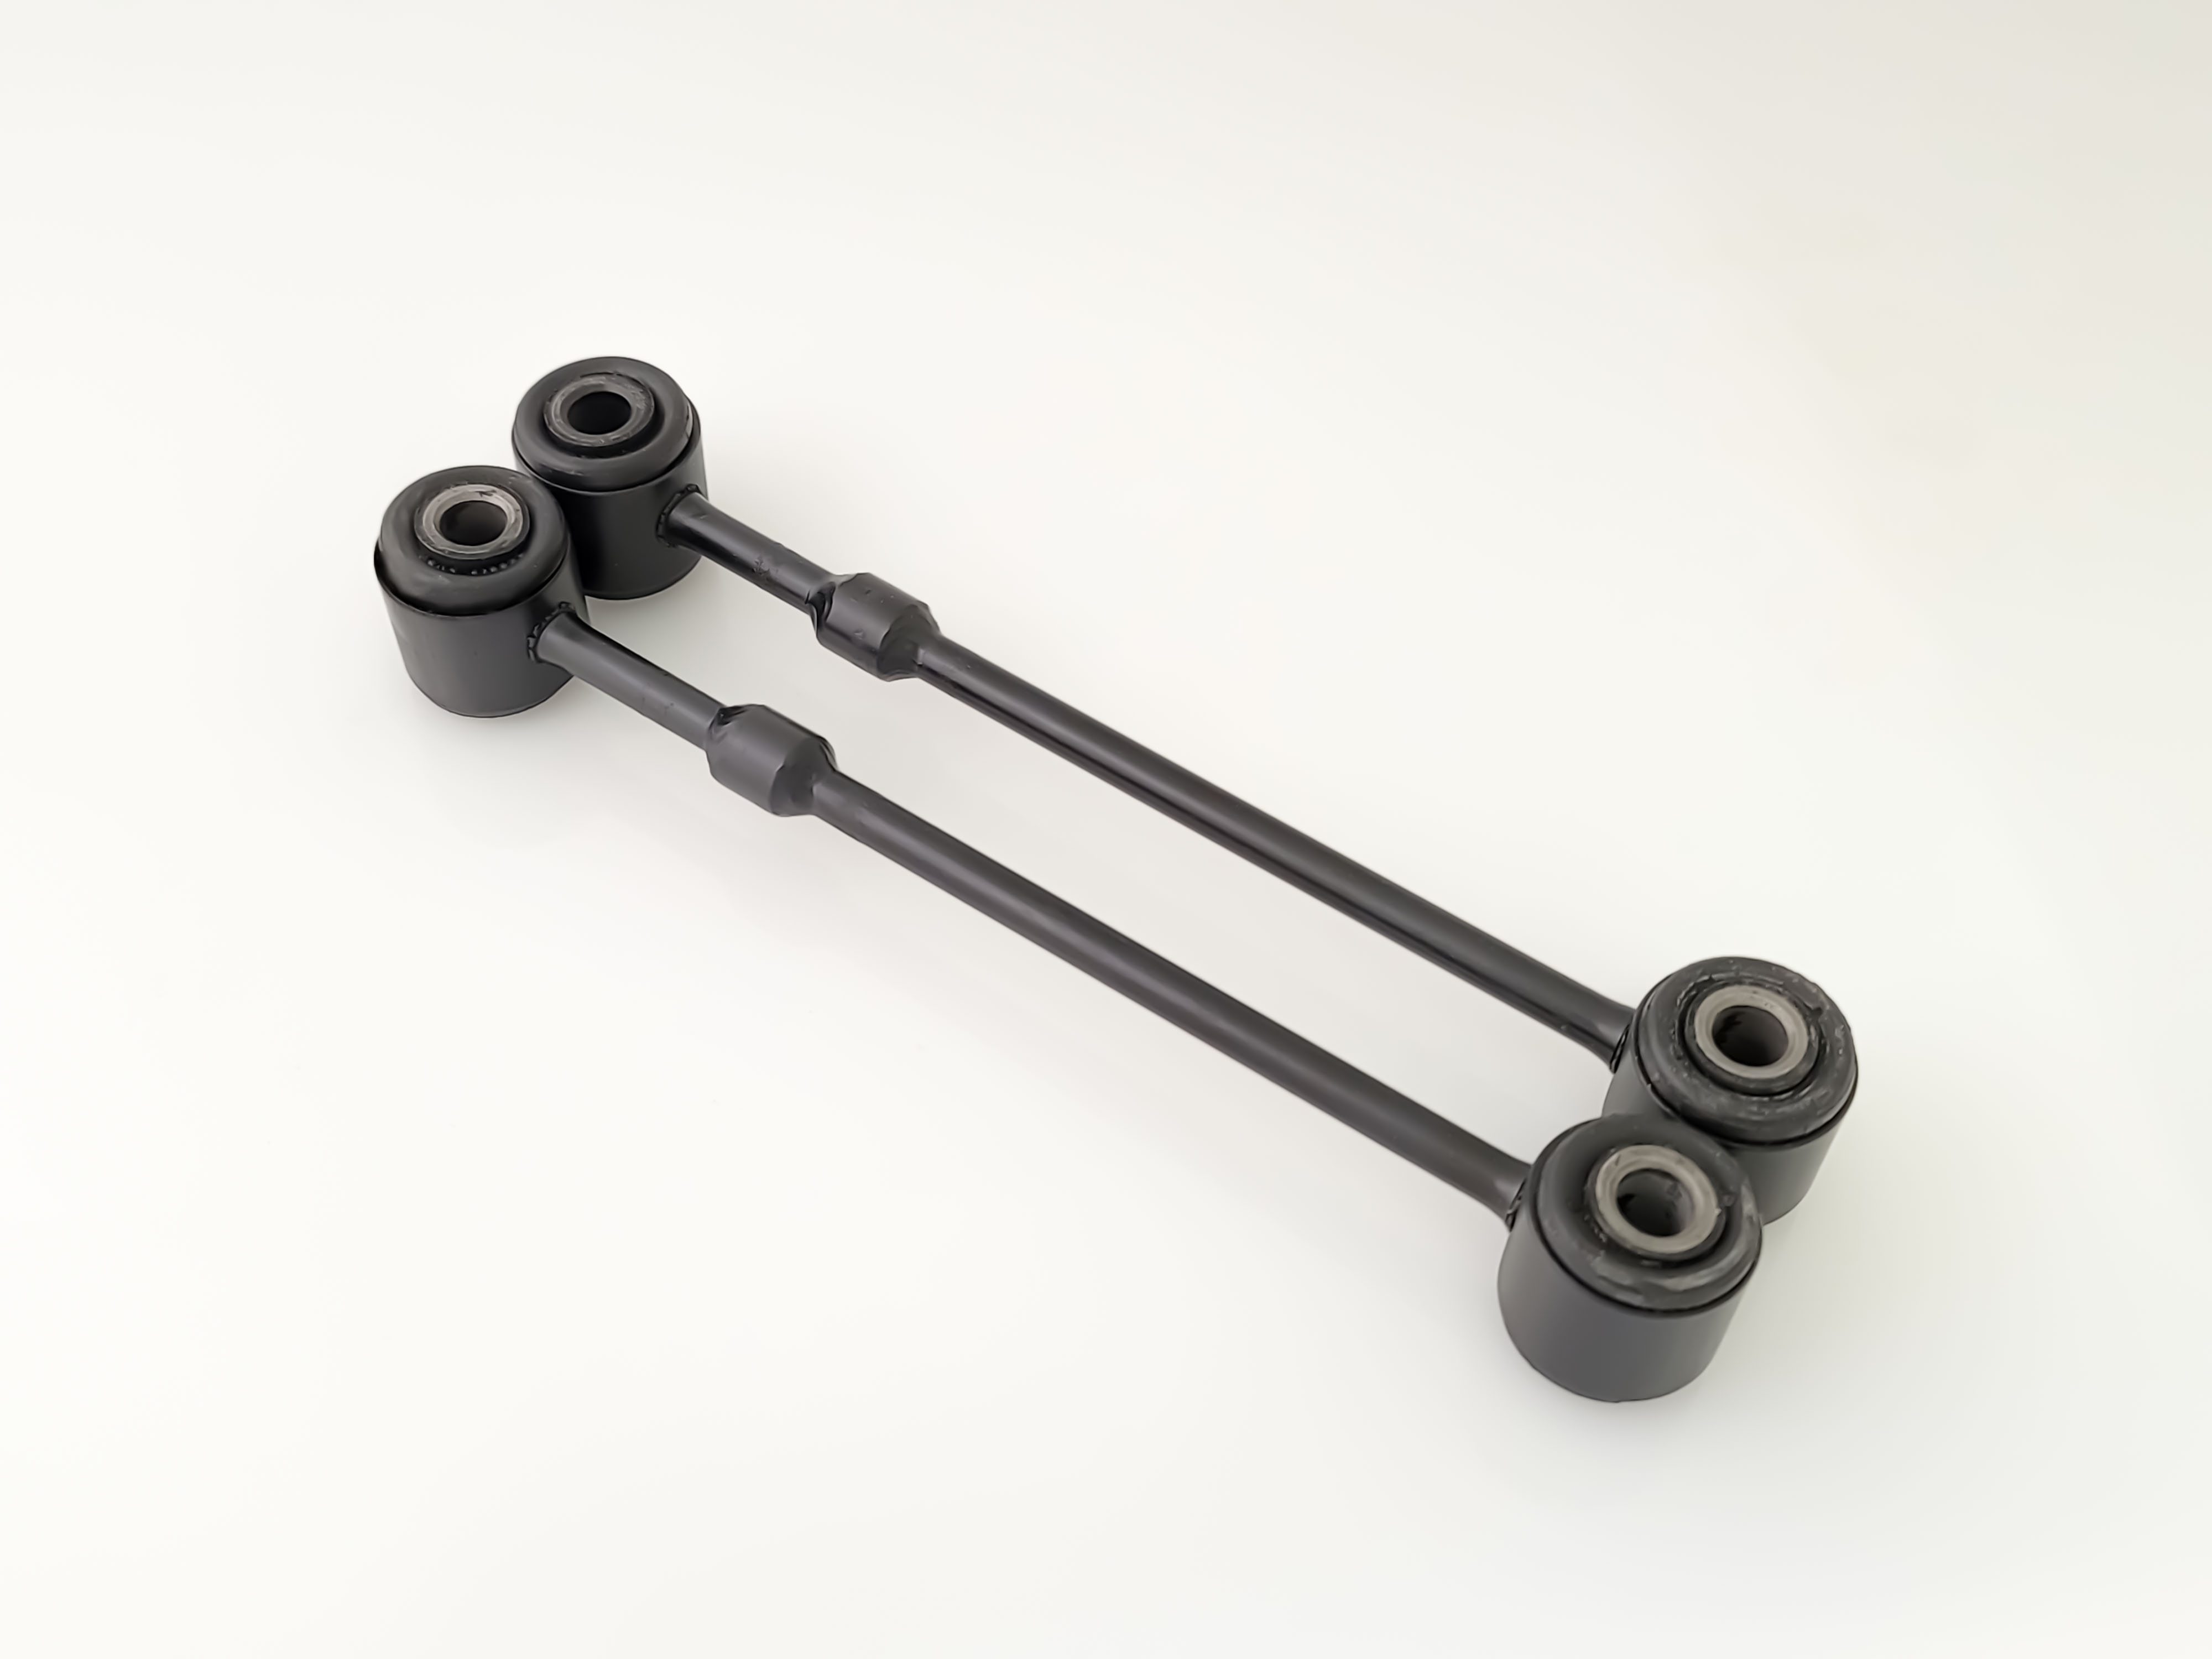 HHP Shortened Rear Sway Bar End Links For 17" to 18" Drag Wheels With Factory Sway Bars Questions & Answers